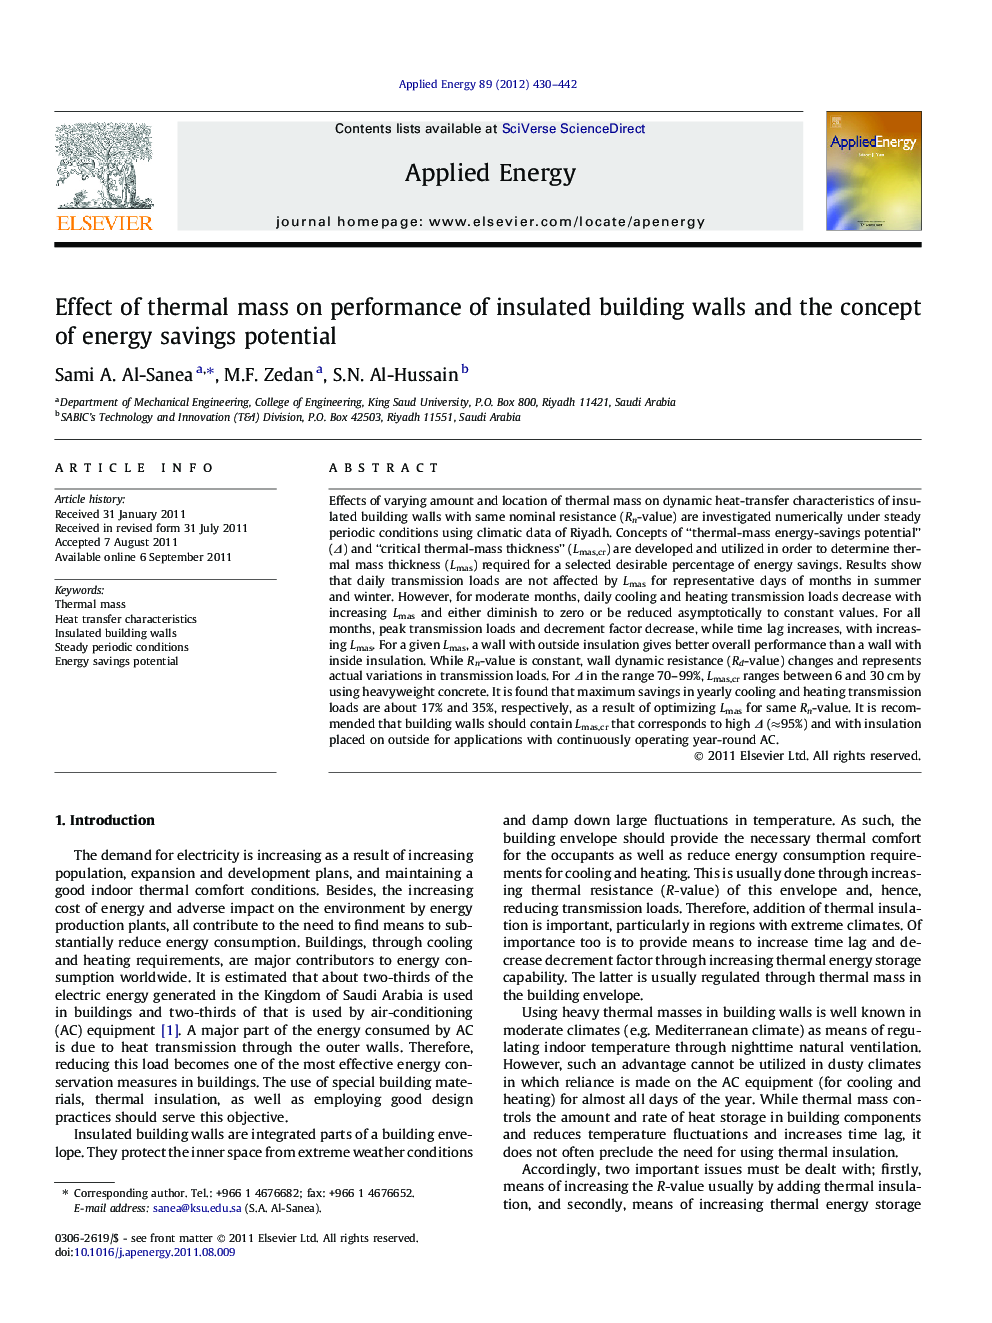 Effect of thermal mass on performance of insulated building walls and the concept of energy savings potential